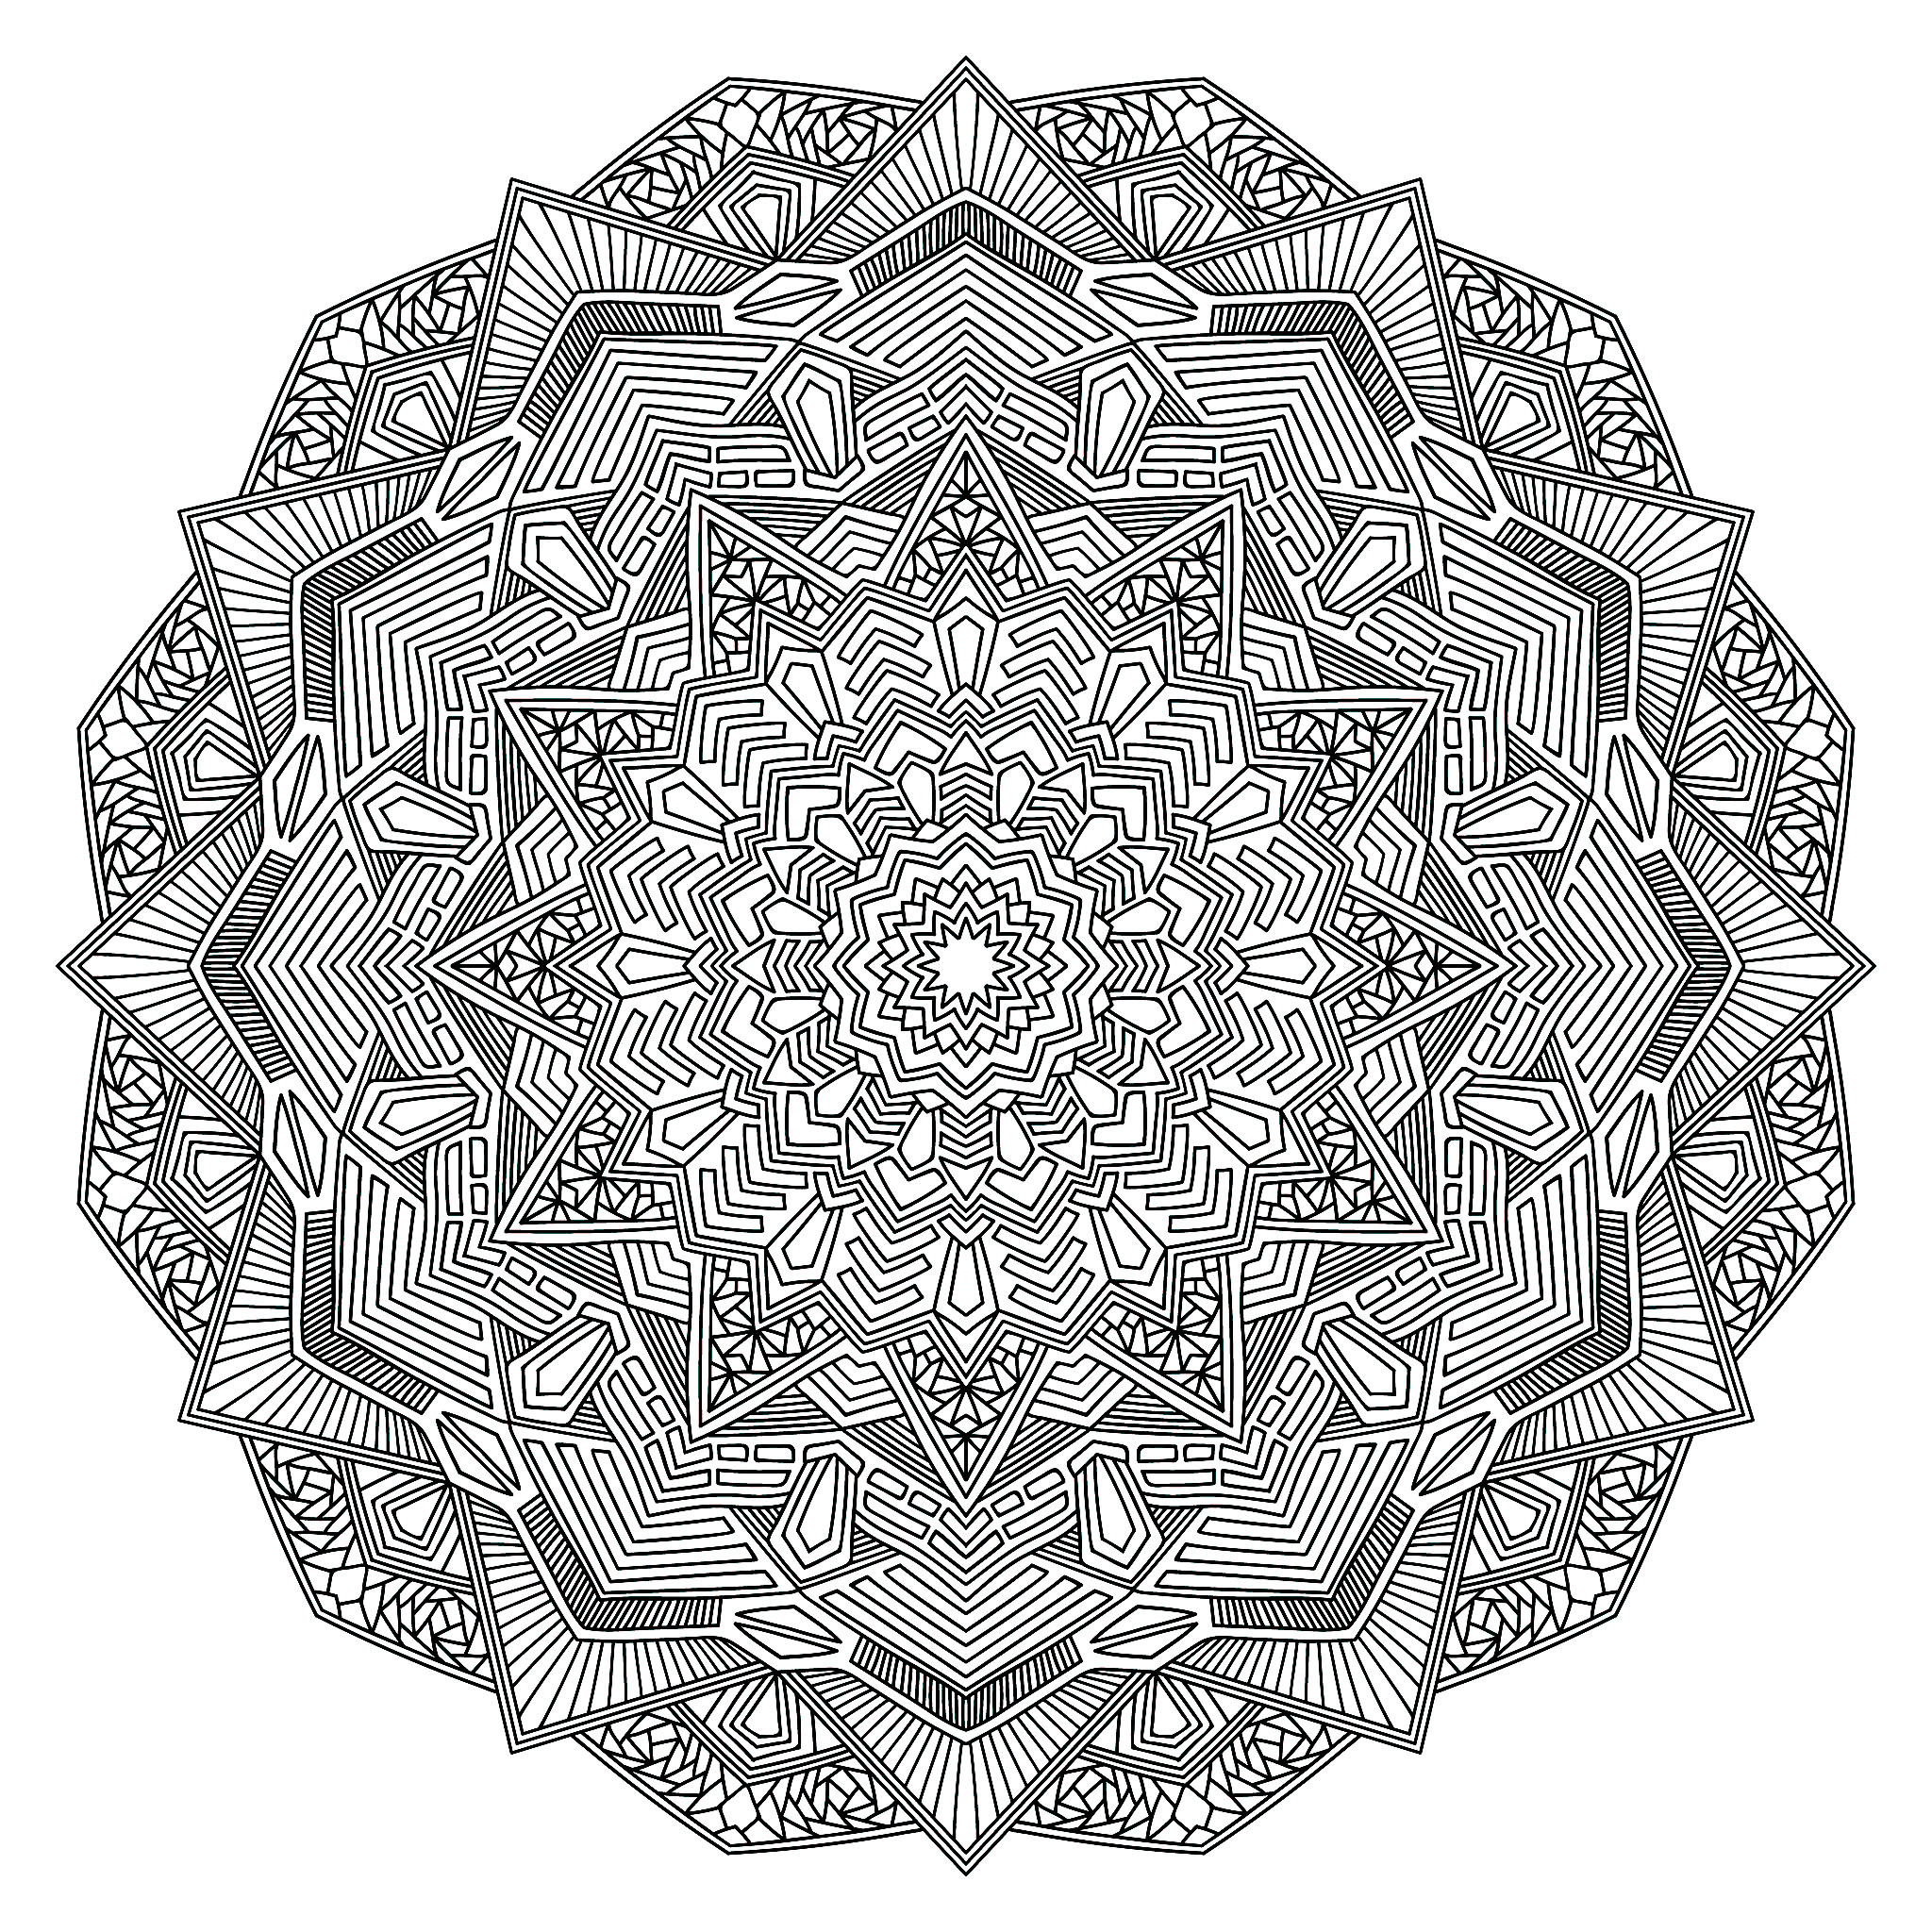 Express your soul, your passion, and the result will certainly be perfect. Let yourself be guided by your instinct to color this incredible Mandala !